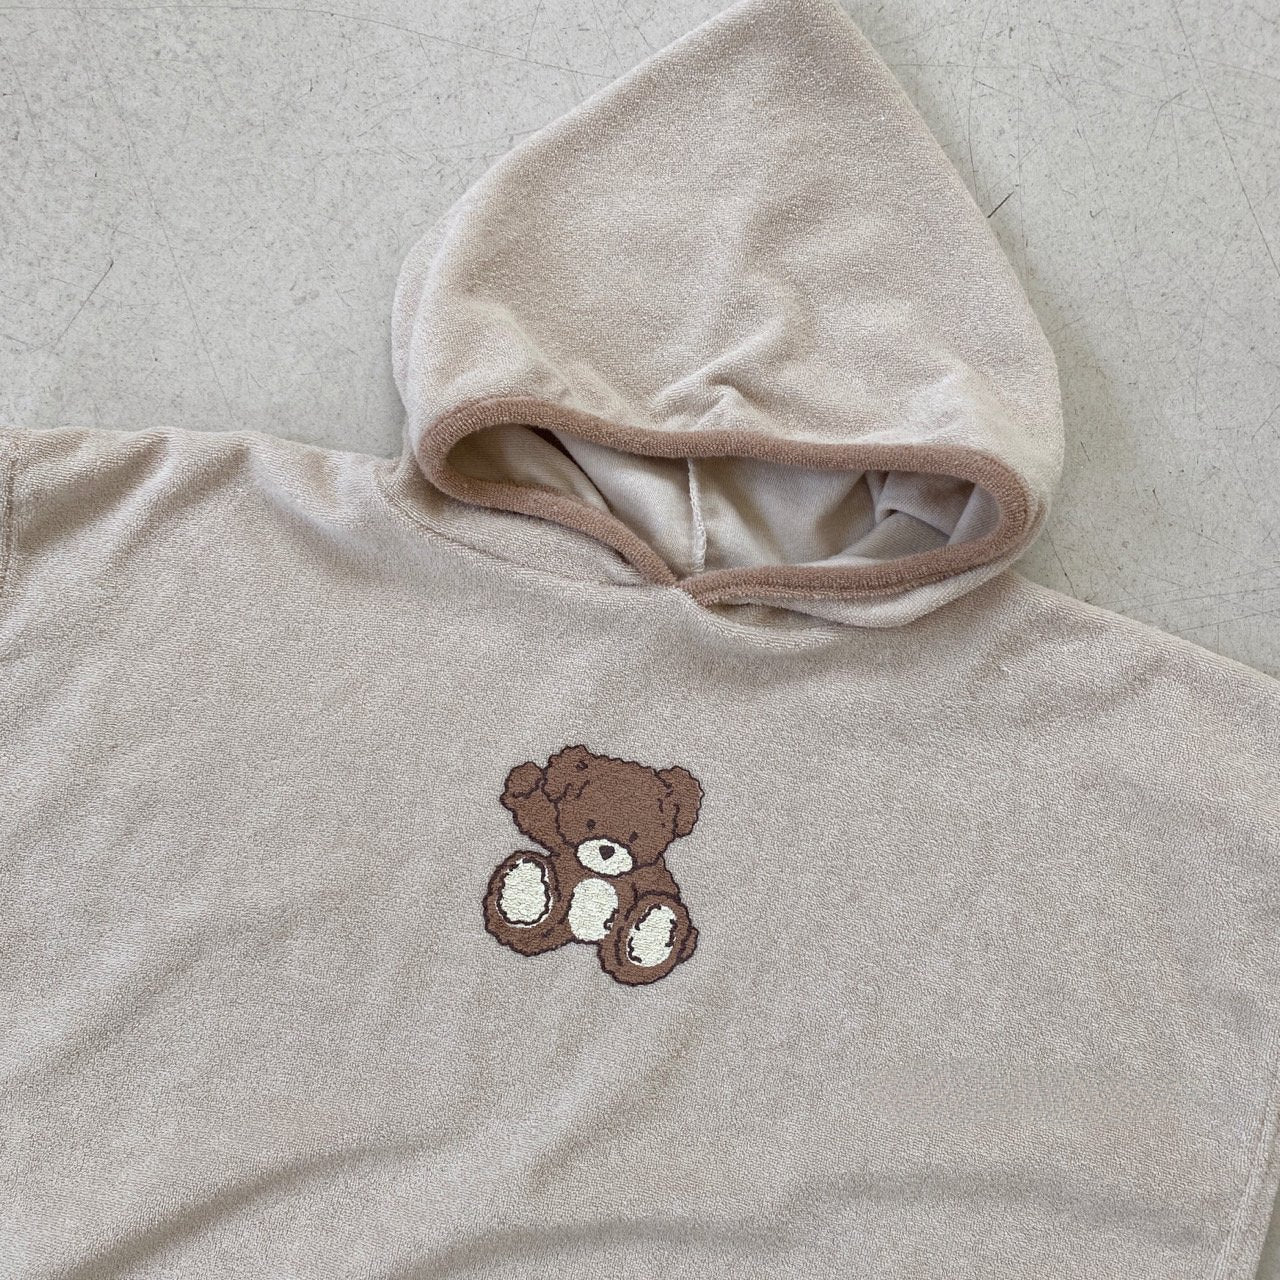 Adorable Baby Hooded Towel (One Size) - Rainbow and Bear Designs